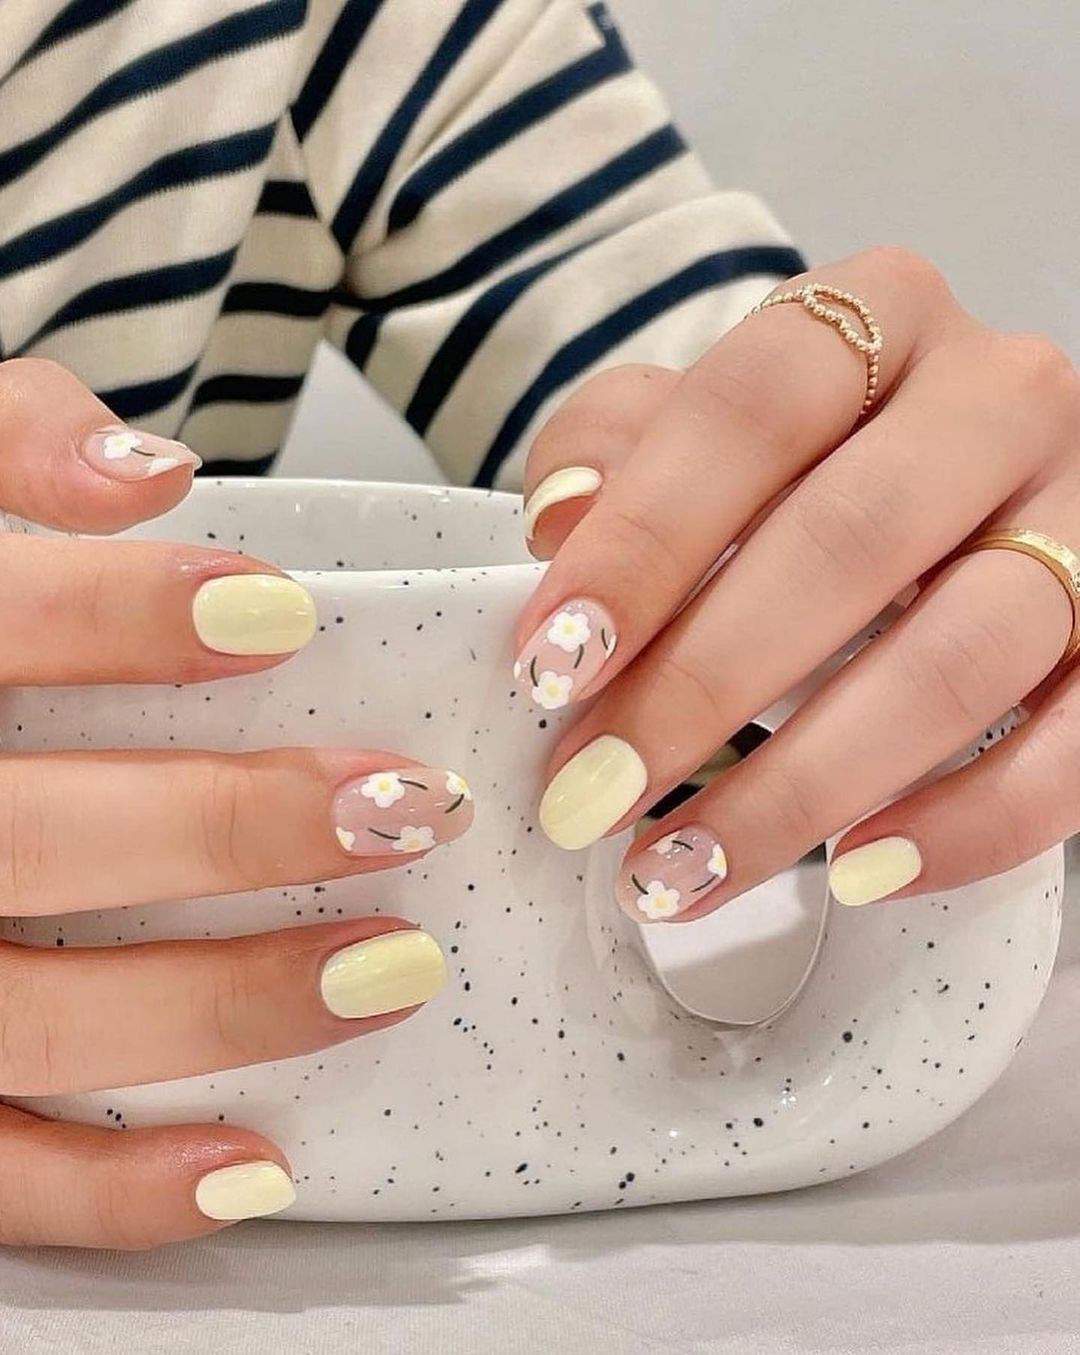 The 100+ Best Nail Designs Trends And Ideas In 2021 images 72